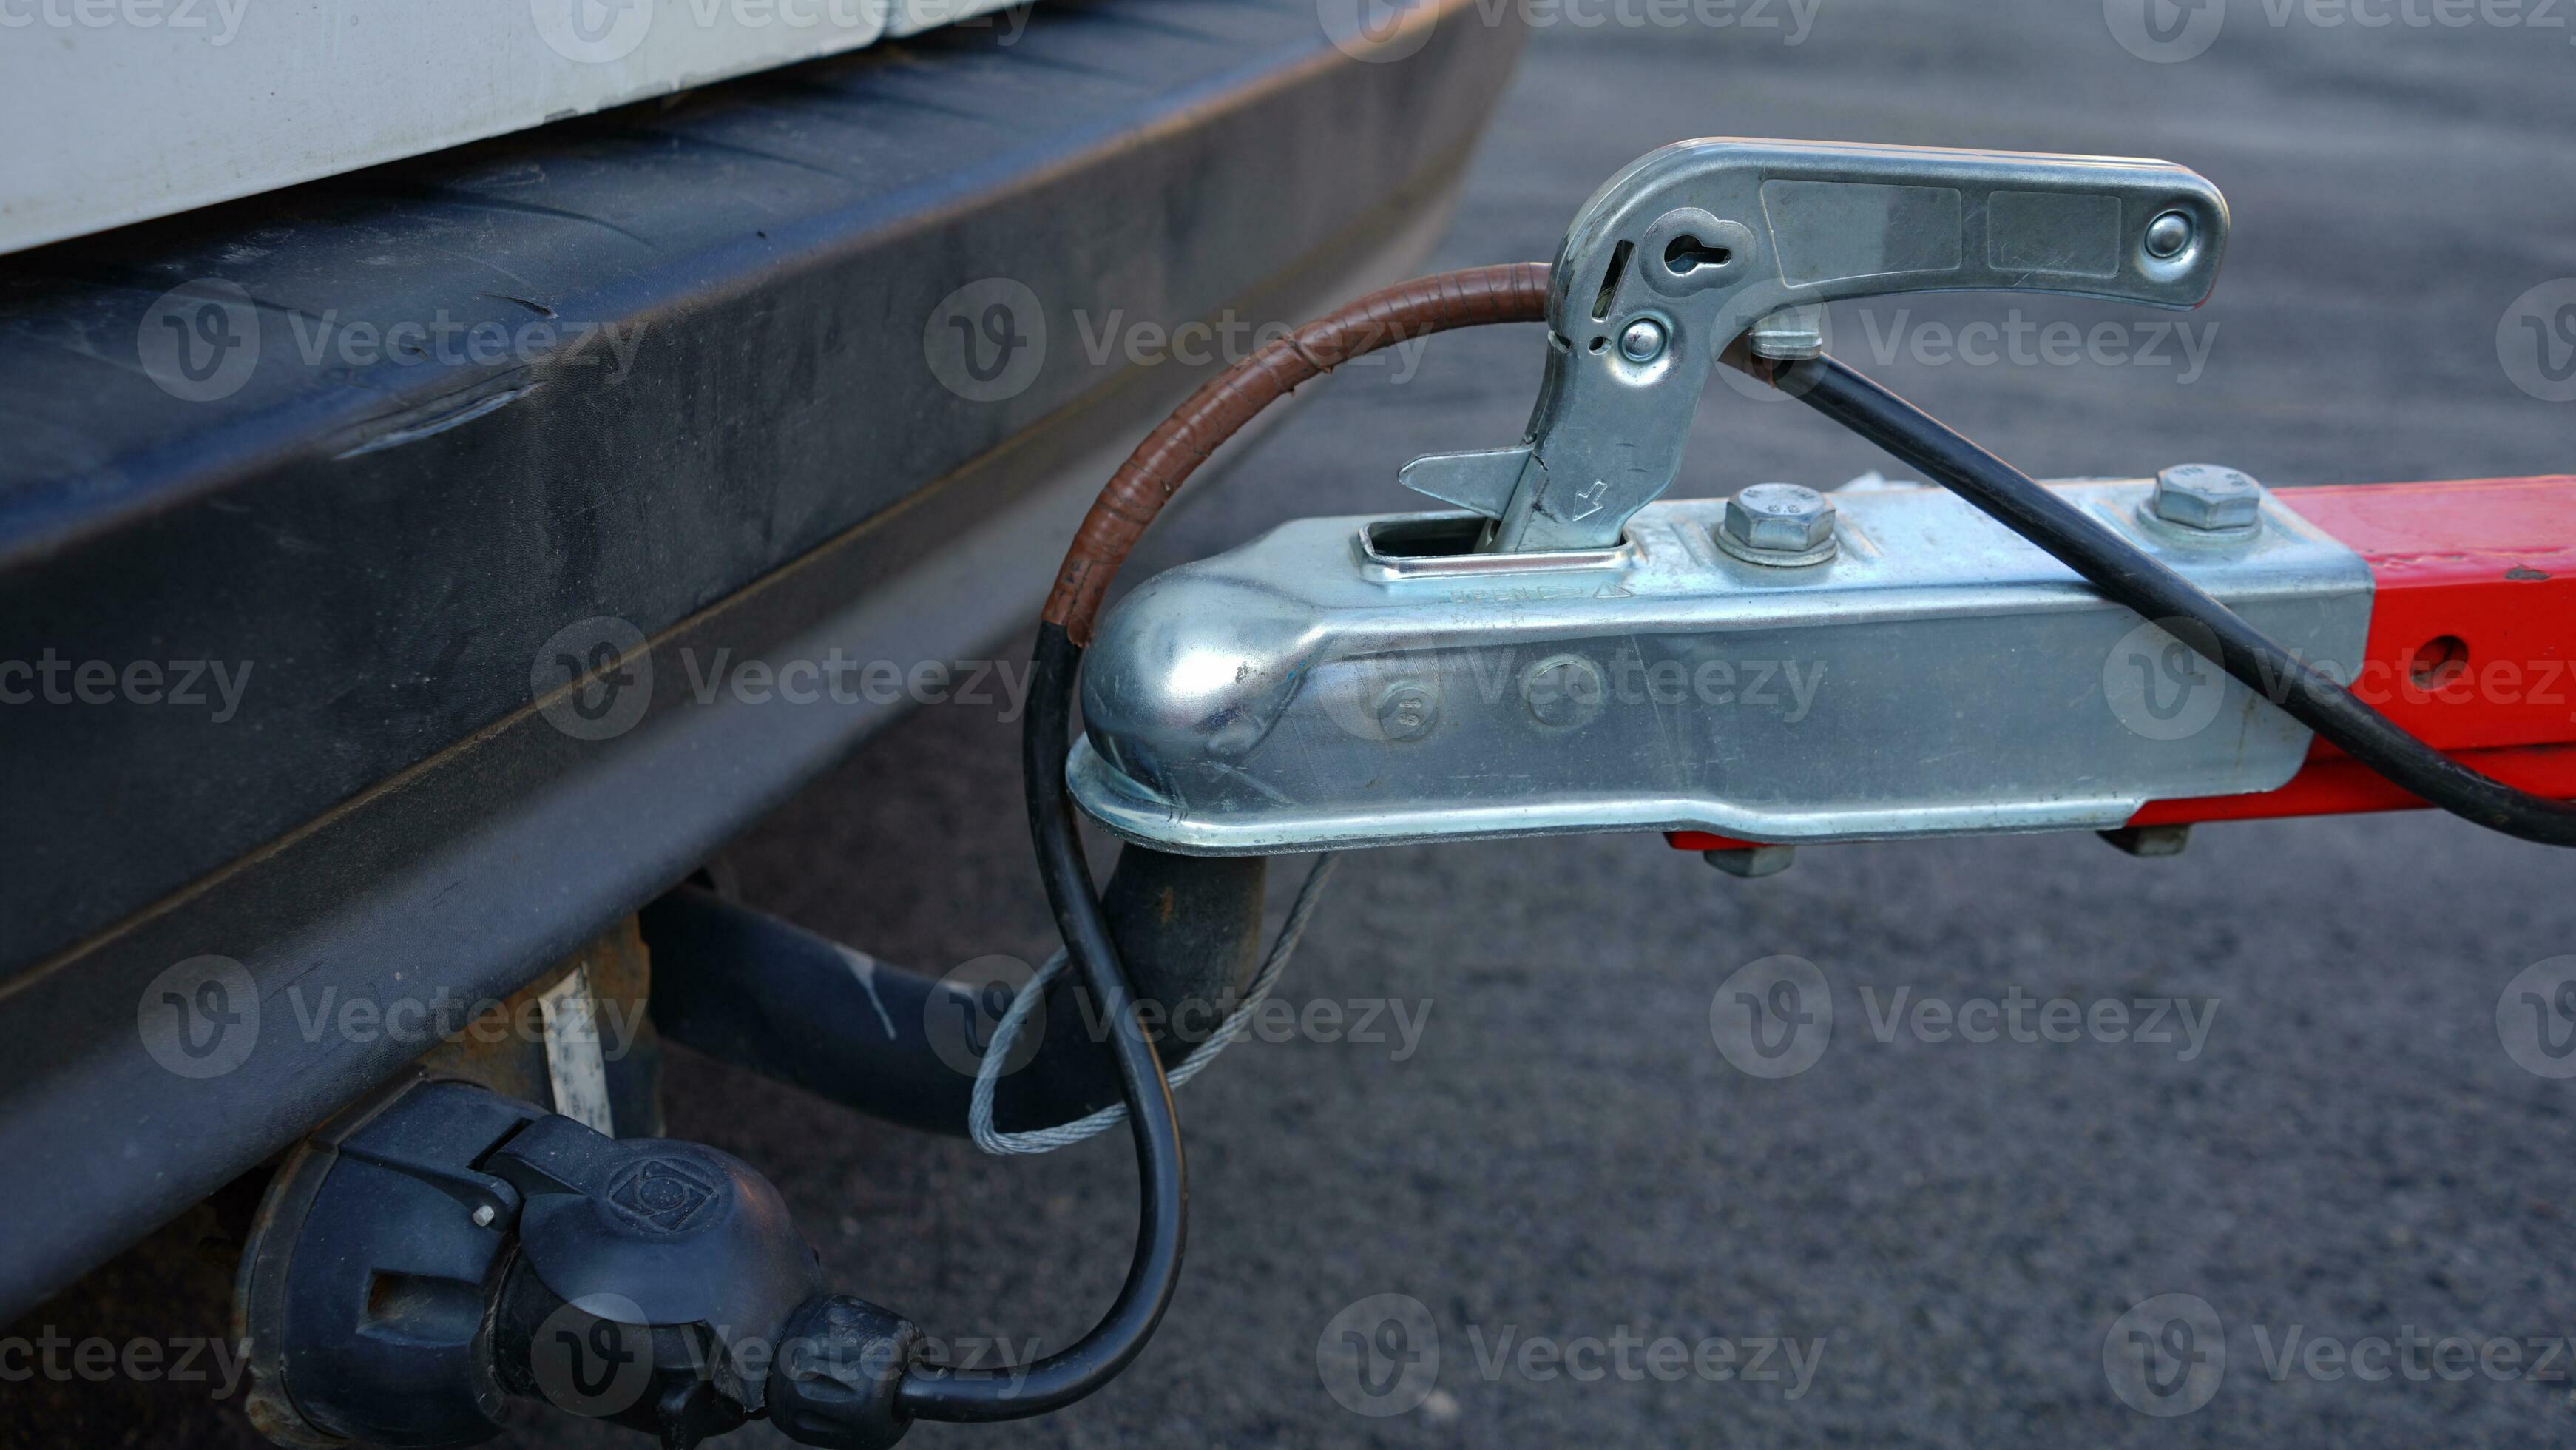 Trailer connected to car. Trailer on car's hook. Car hitch